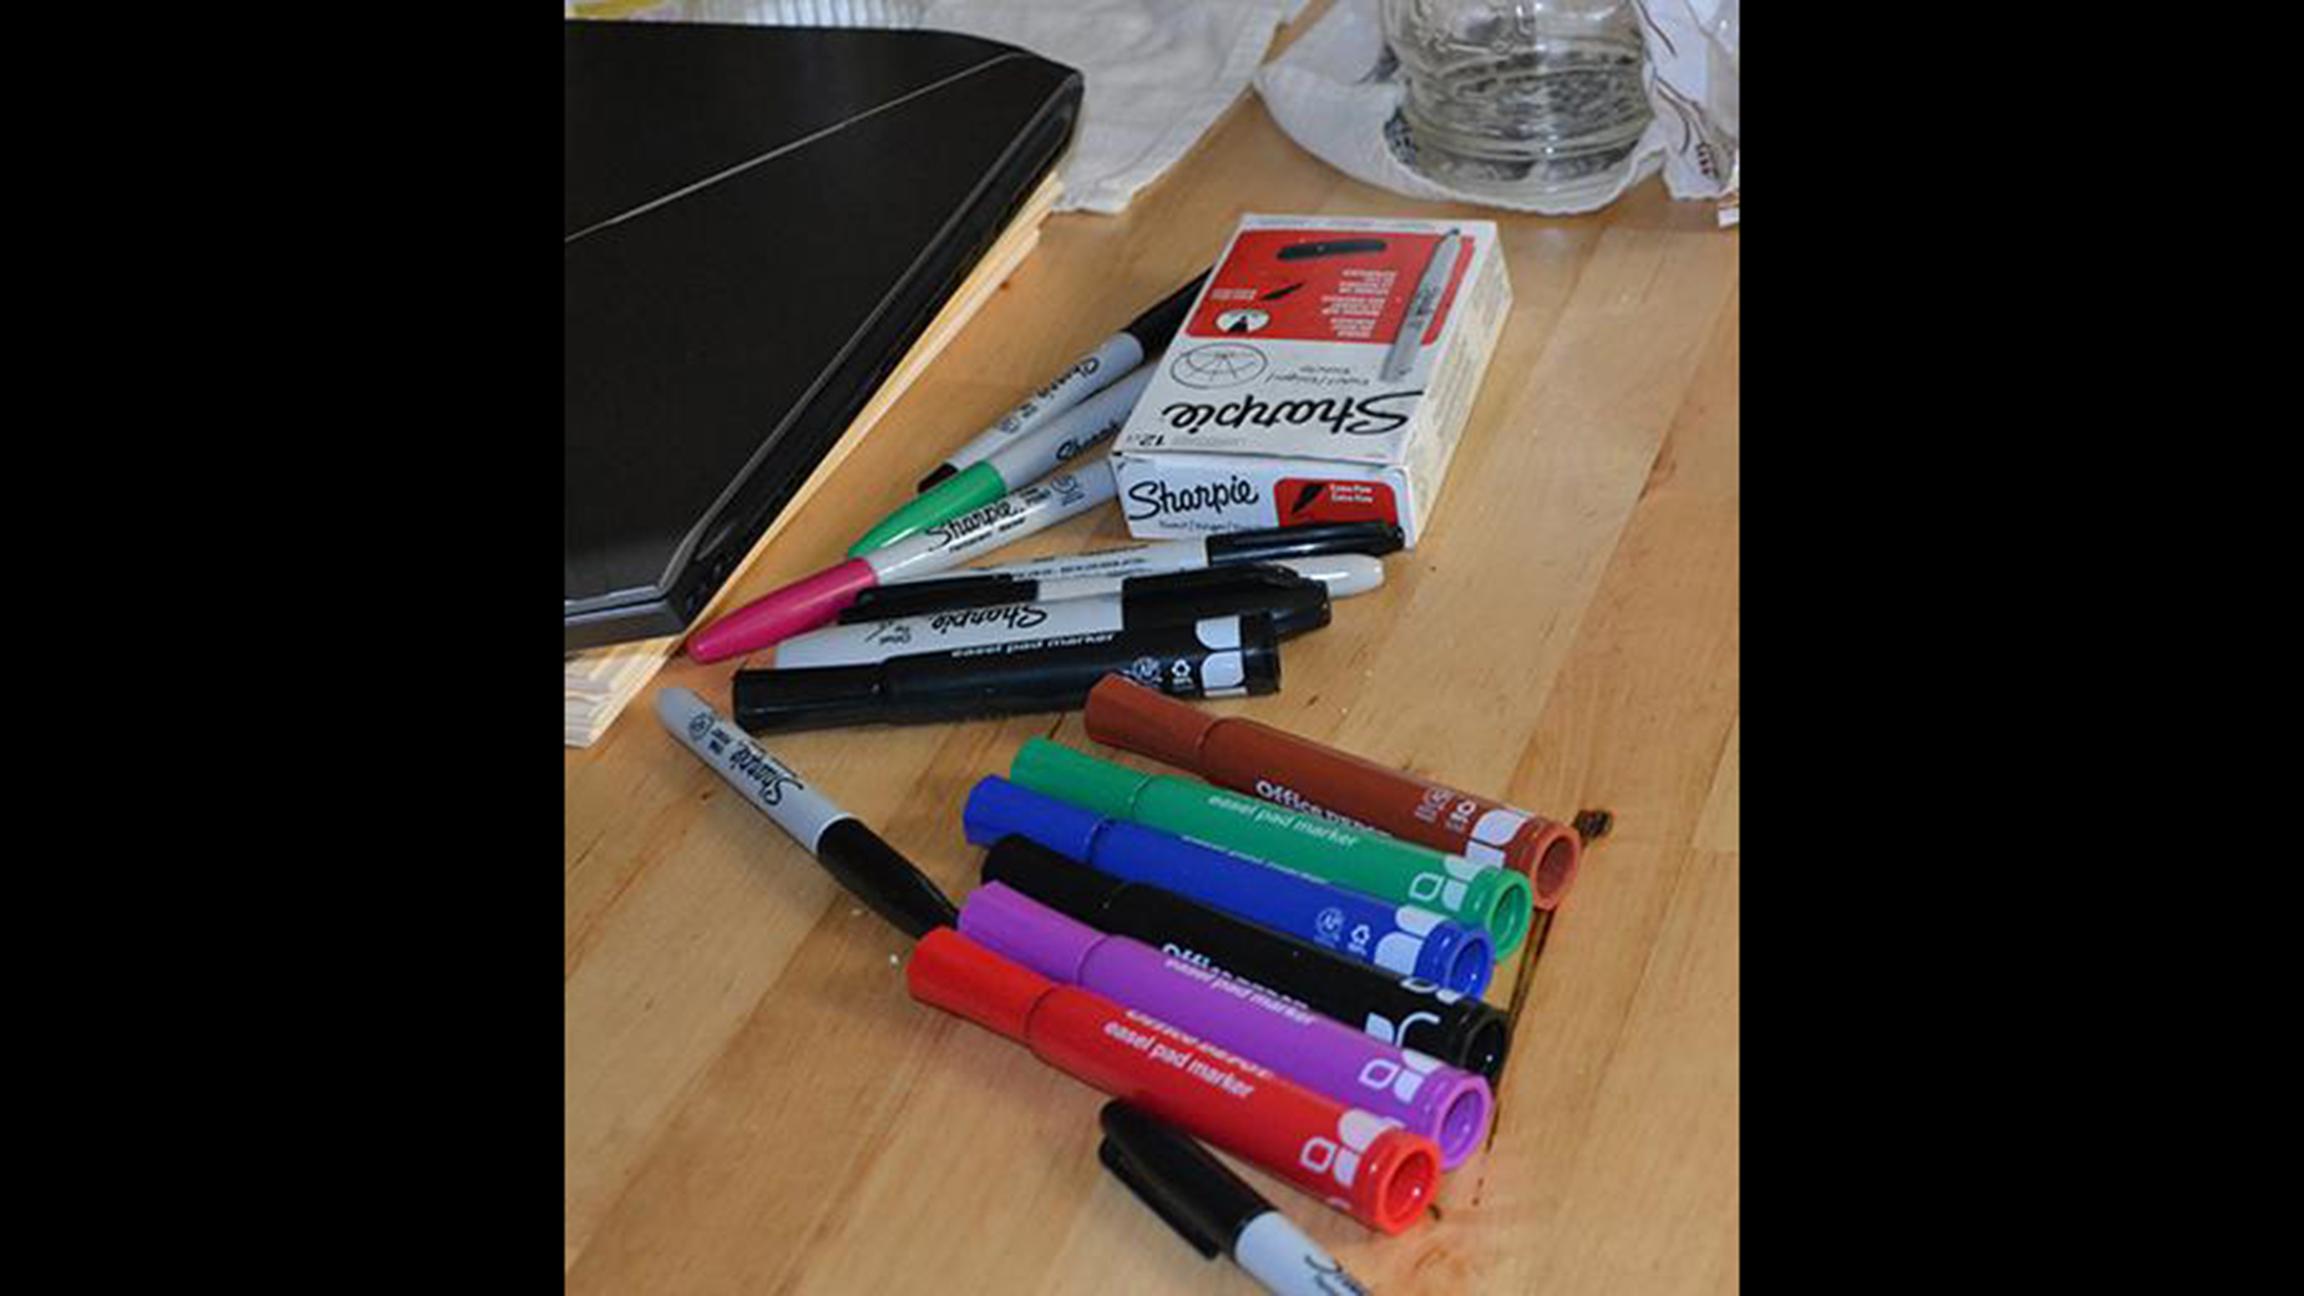 Markers, highlighters and other school supplies scattered across a kitchen table inside Franzinger Barrett's home. (Matt Masterson / Chicago Tonight)